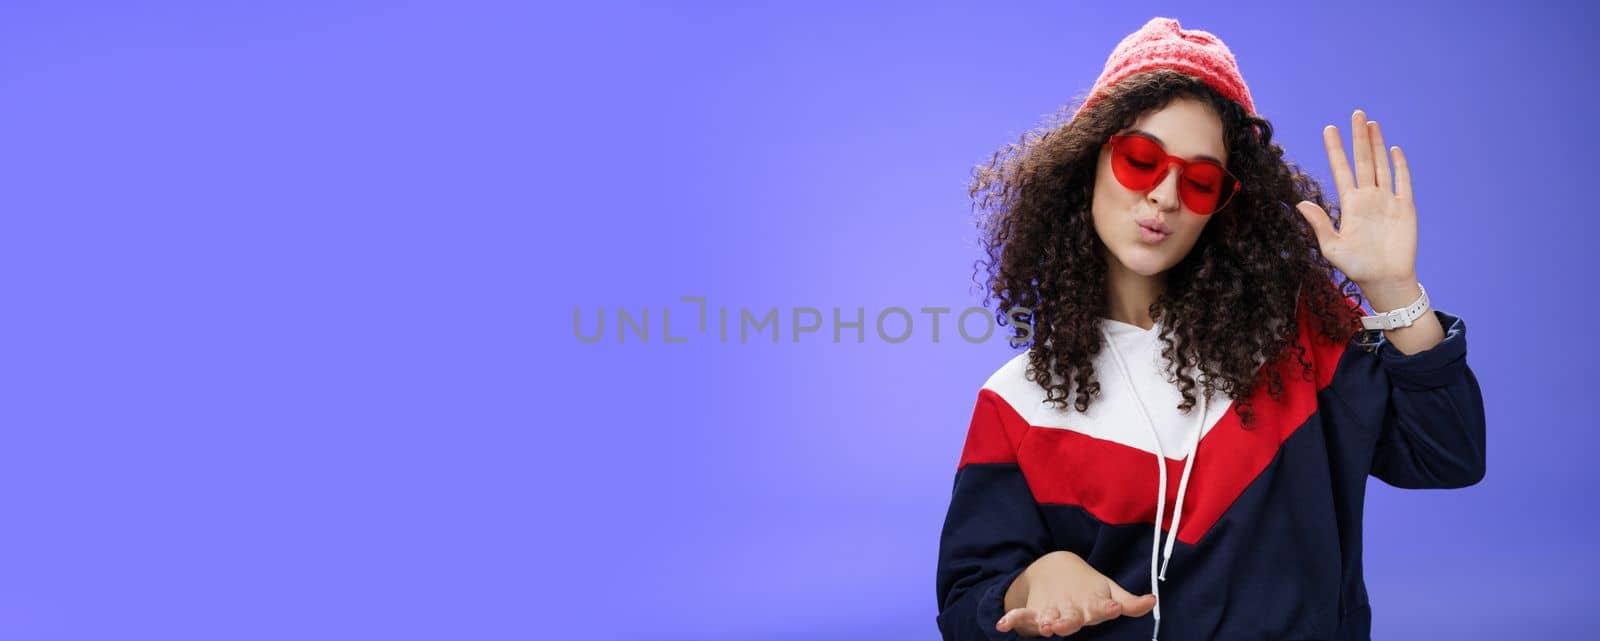 Lifestyle. Studio shot of cool and stylish dj girl in red beanie and sunglasses raising palm as enjoying cool music and dancing to rhythm folding lips having fun at awesome party posing chill over blue wall.